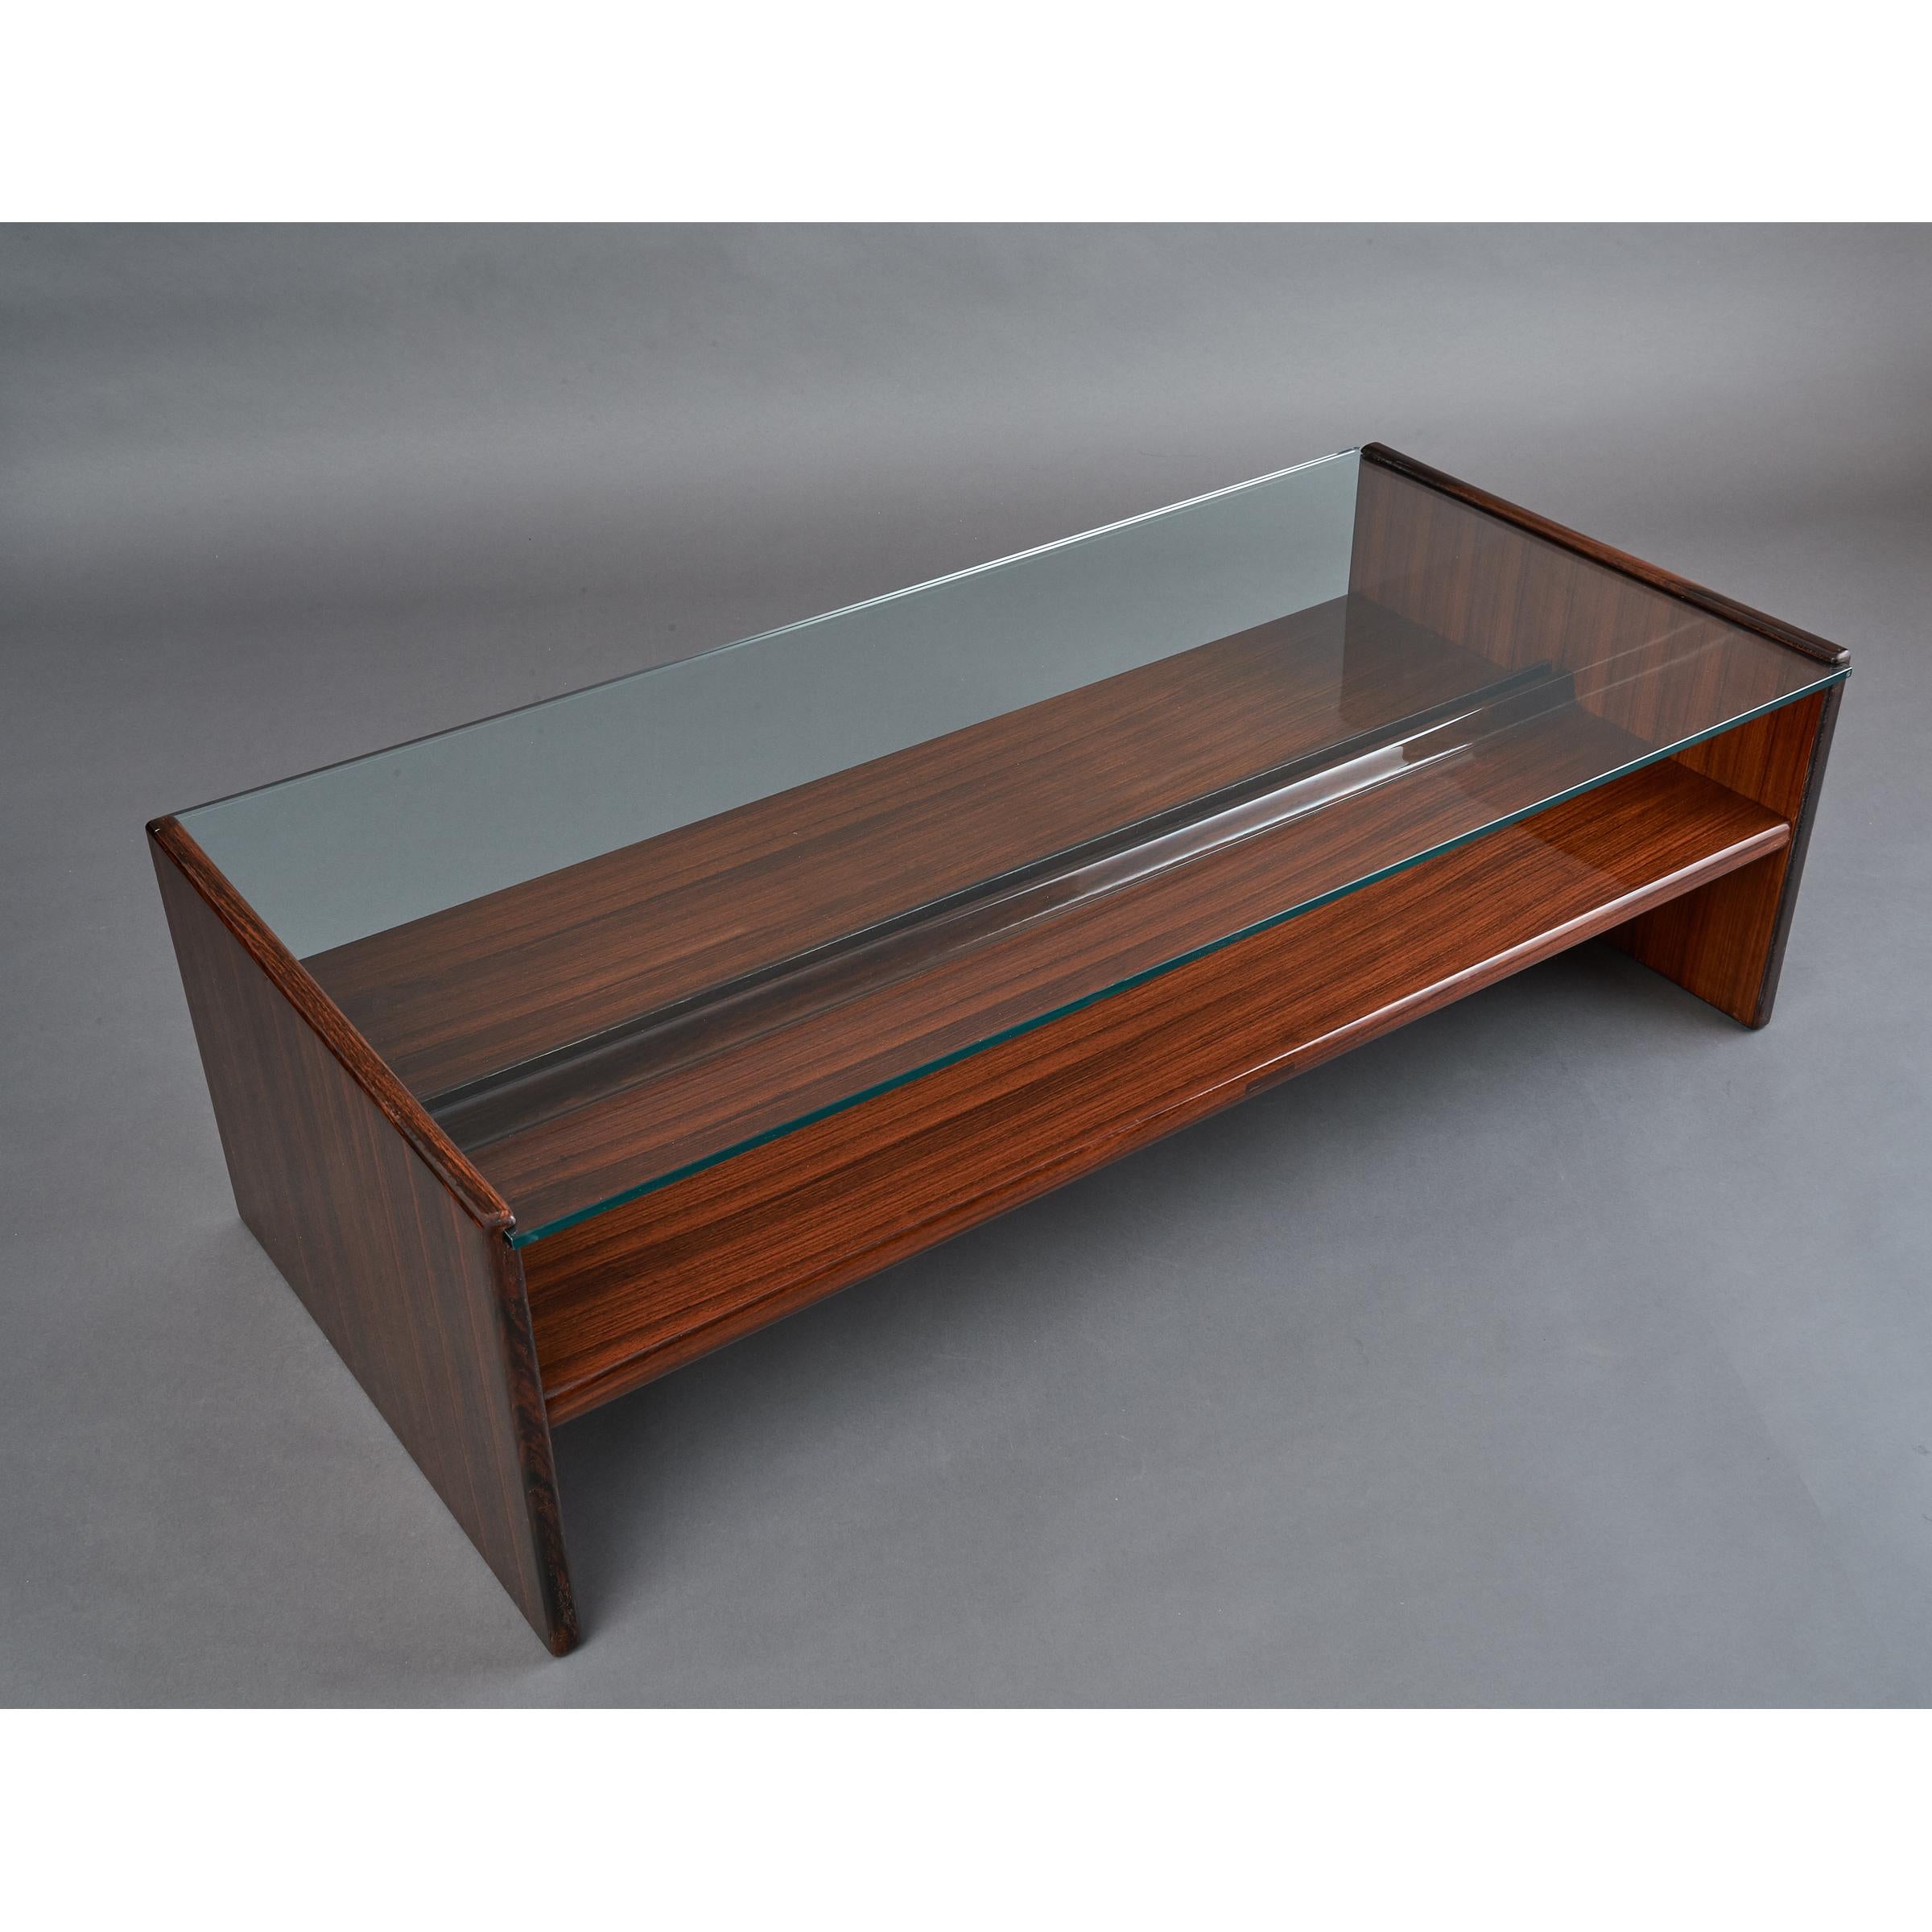 Italy, 1970s
Modernist long rectangular coffee table in beautifully grained wood veneer
with elegantly articulated shelf, clear glass top.
Measures: 51 W x 24.5 D x 16 H.